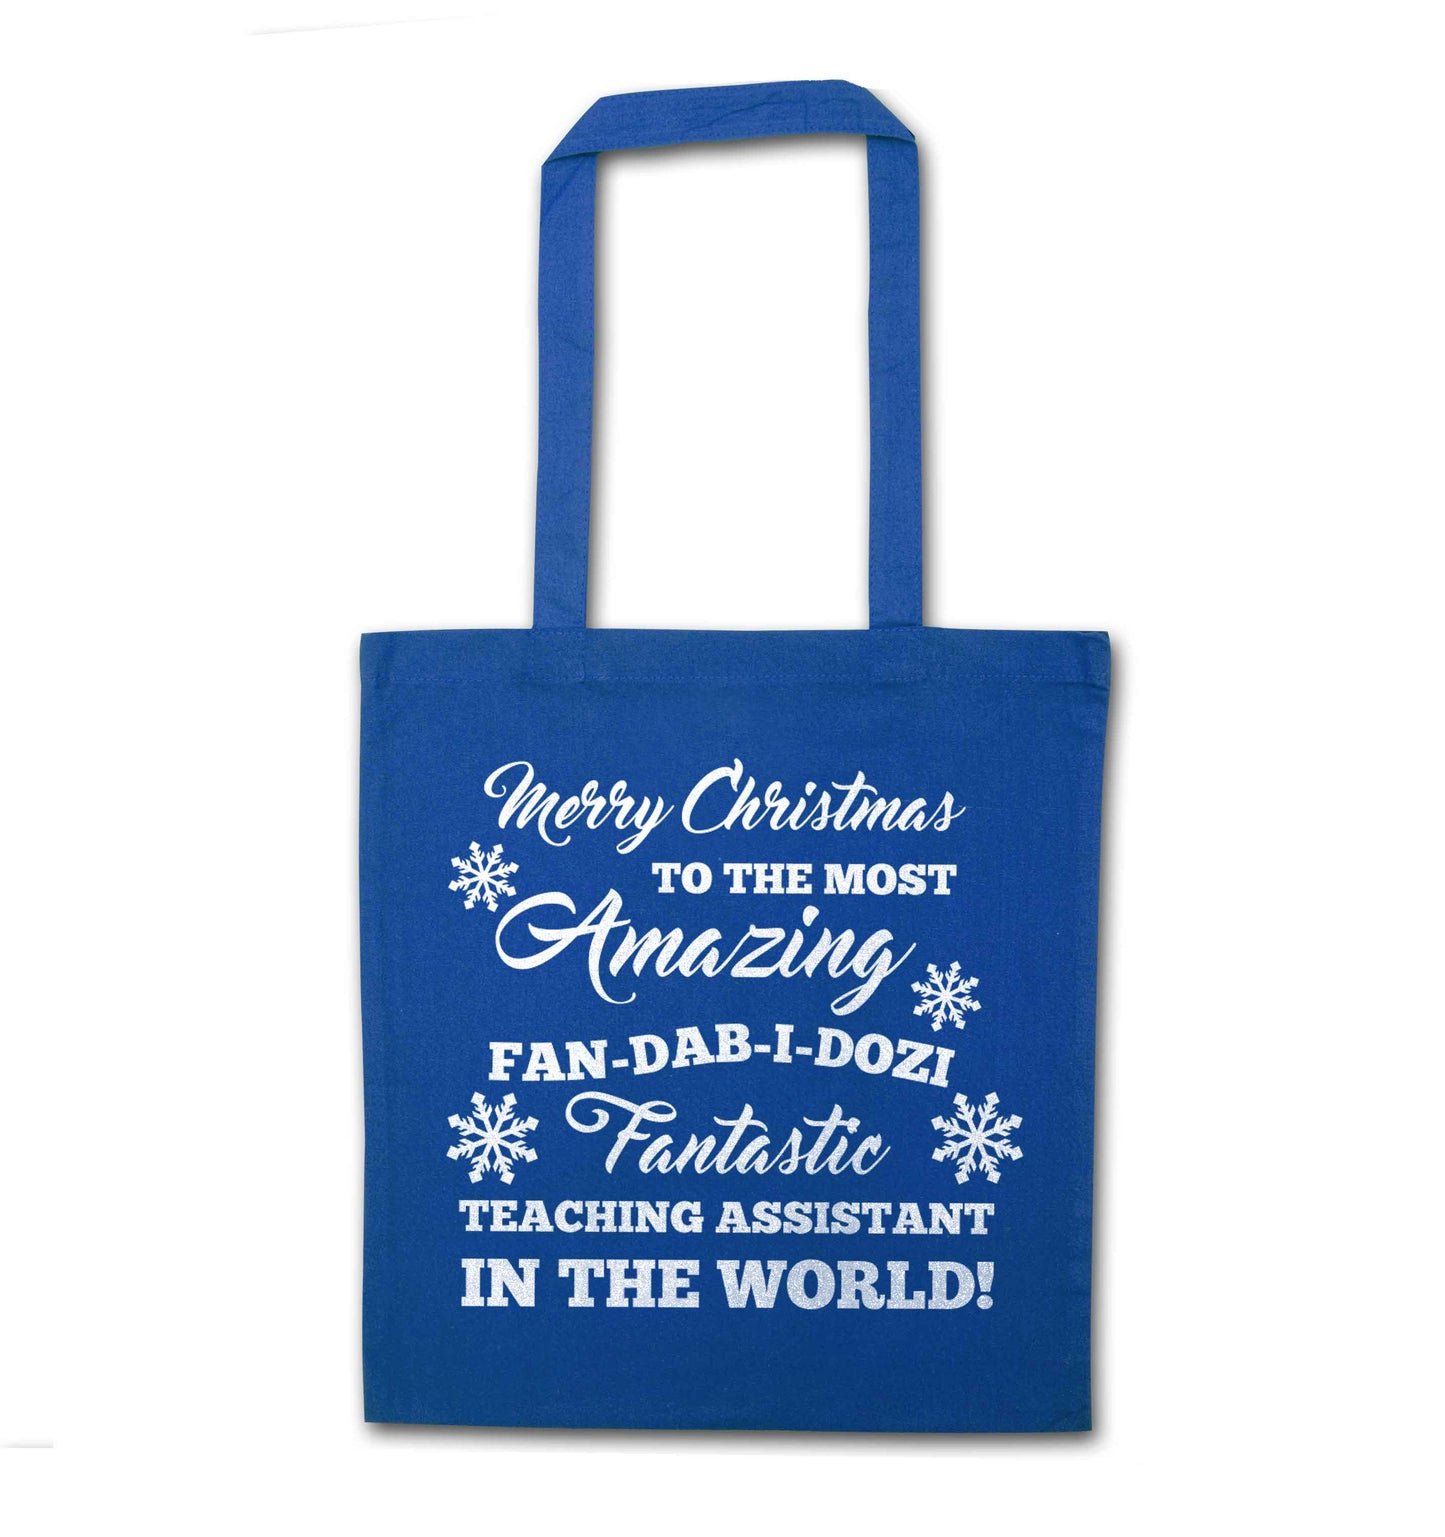 Merry Christmas to the most amazing fan-dab-i-dozi fantasic teaching assistant in the world blue tote bag